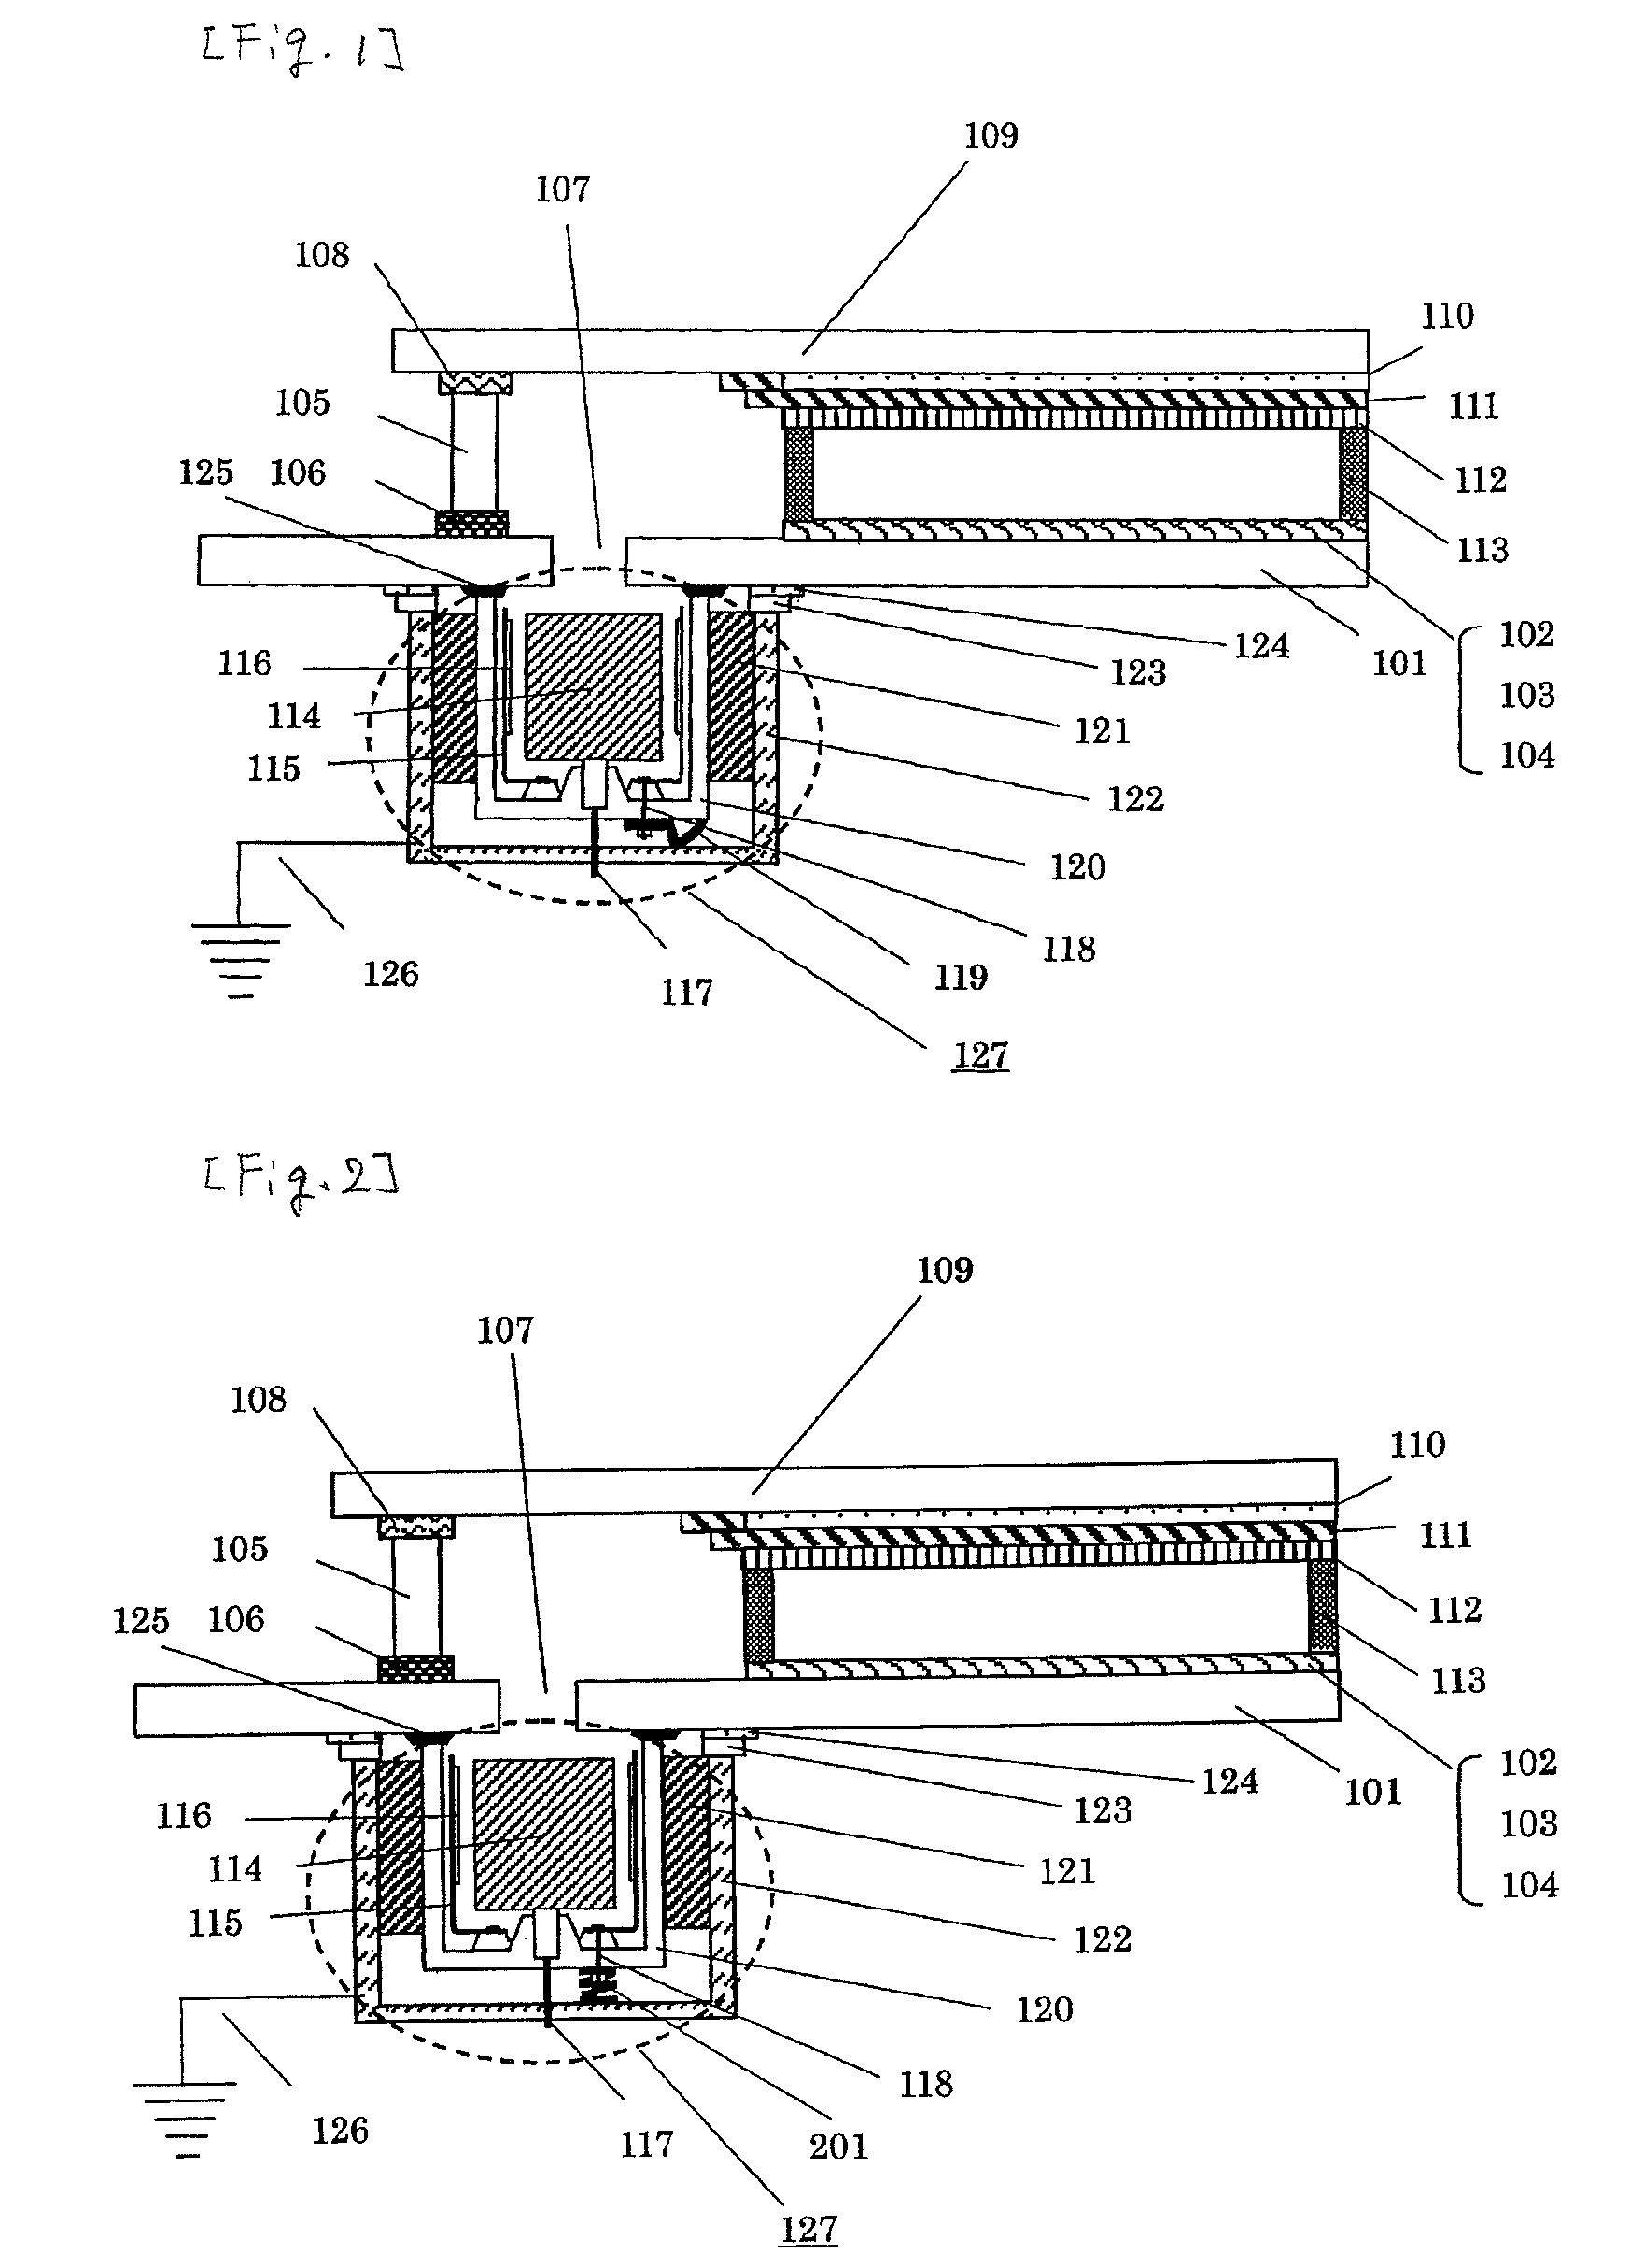 Image display device having an ion pump with reduced leakage